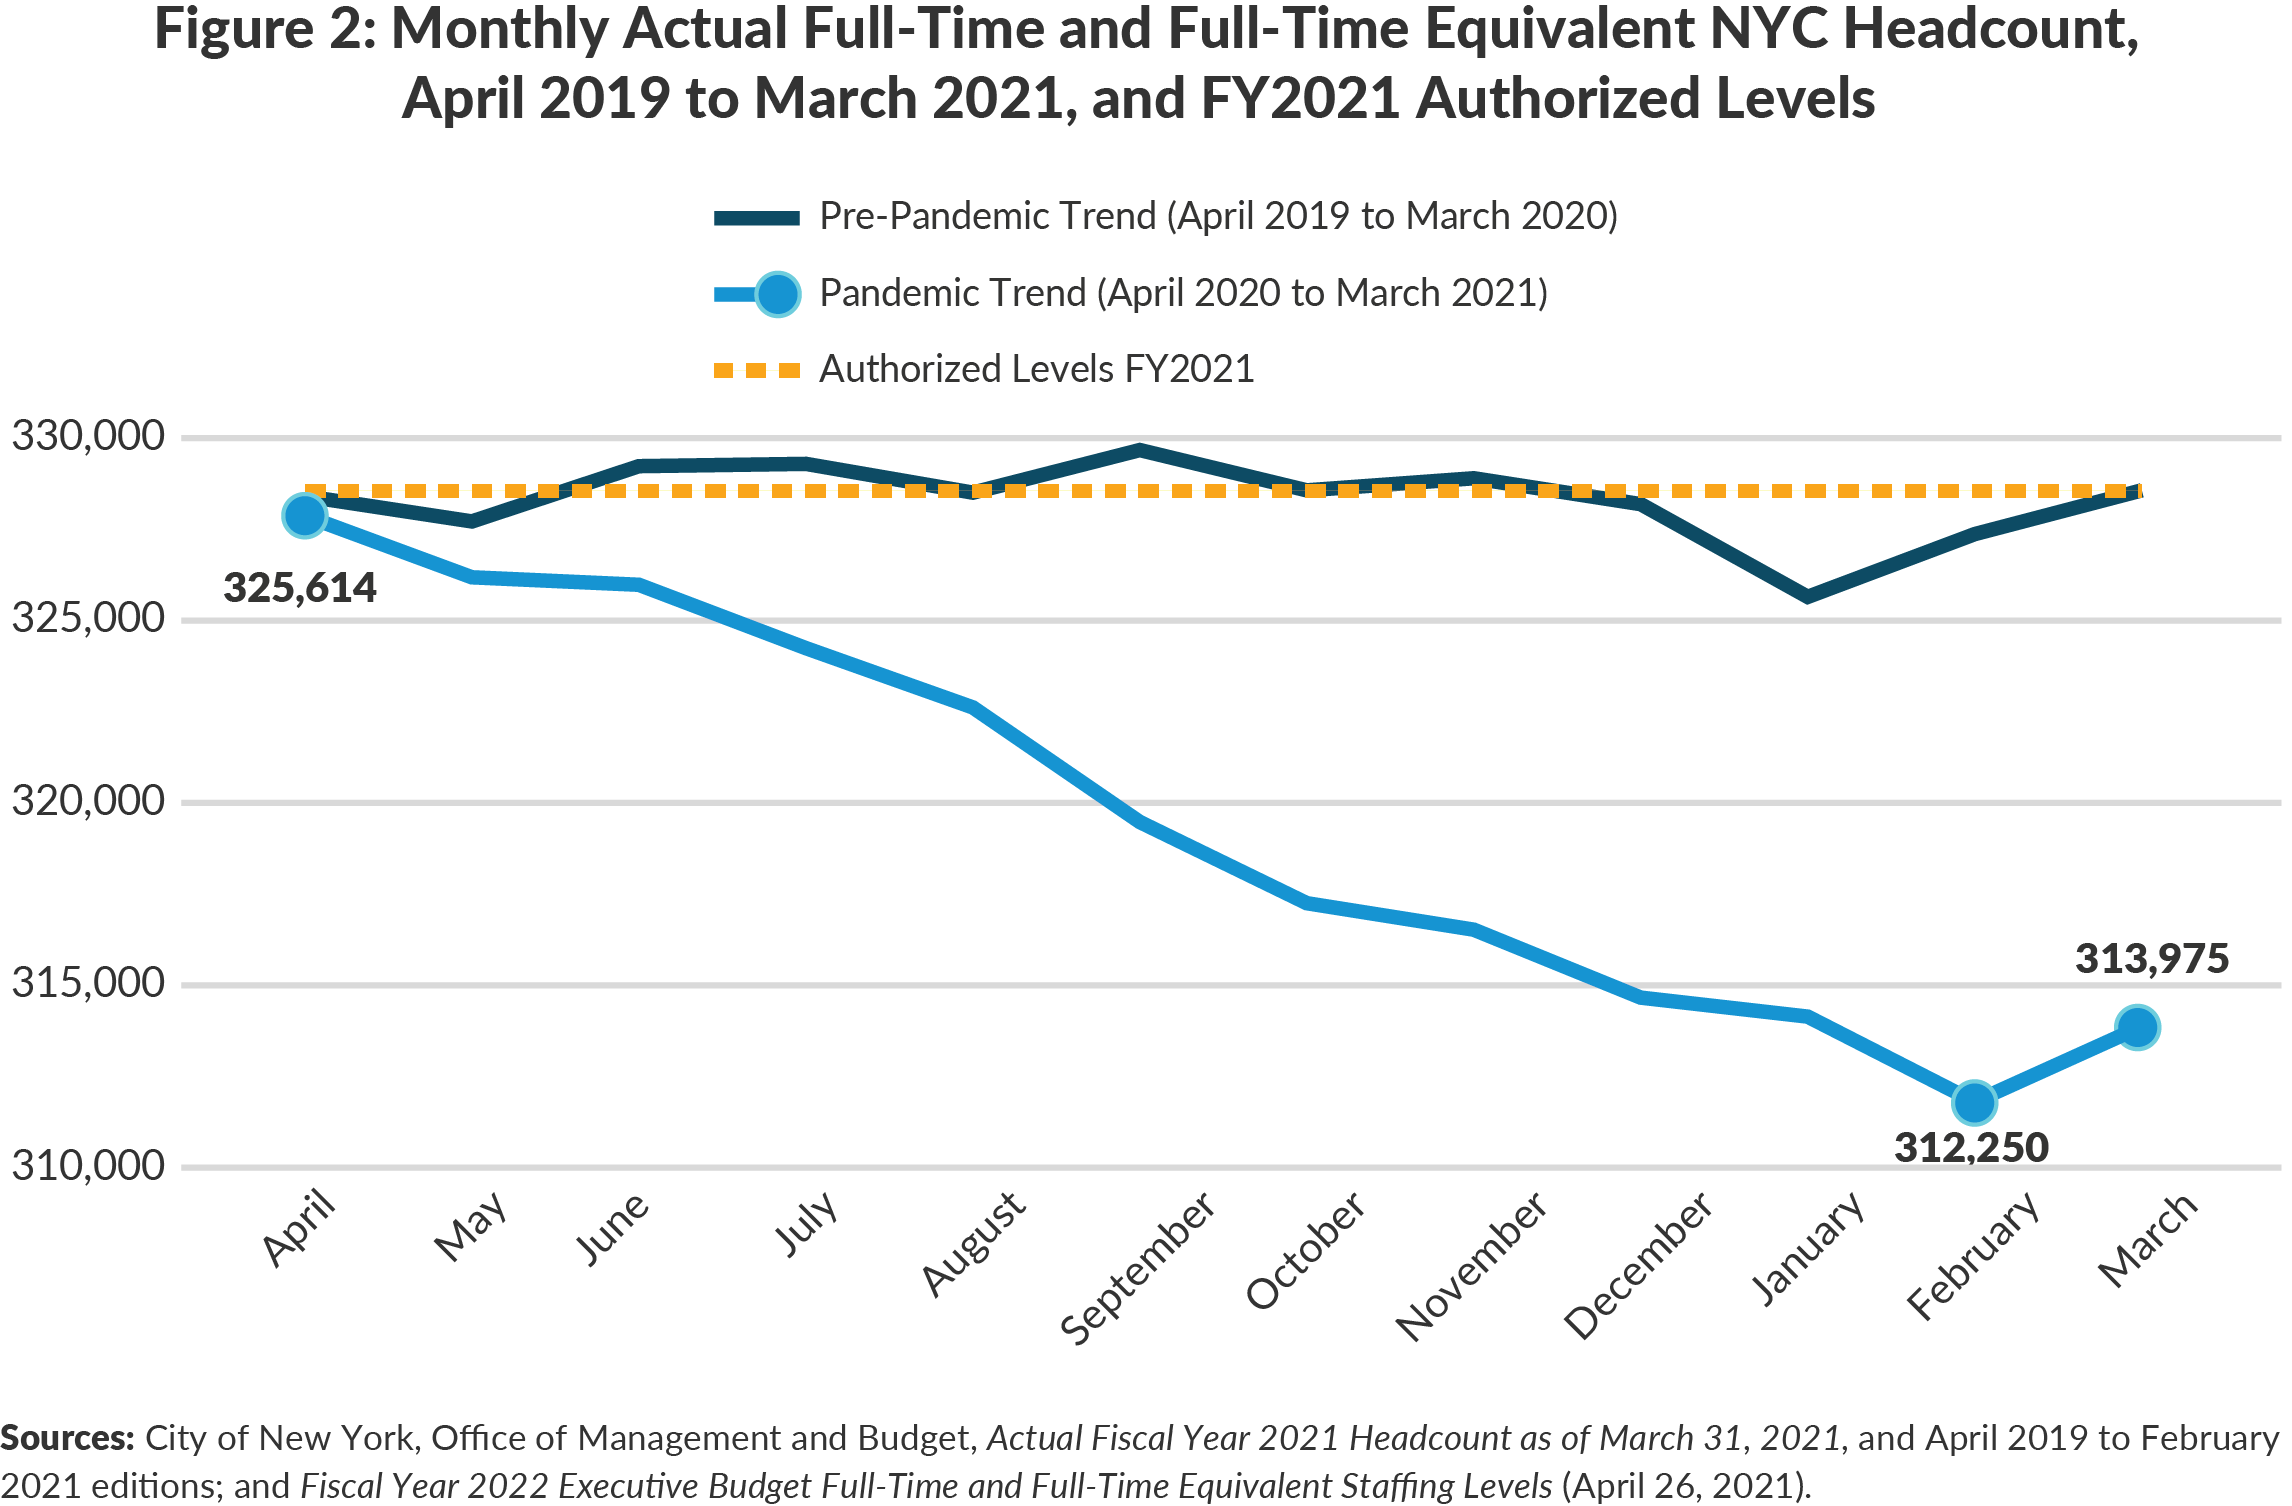 Figure 2. Monthly Actual Full-Time and Full-Time Equivalent NYC Headcount, April 2019 to February 2021, and FY2021 Authorized Levels